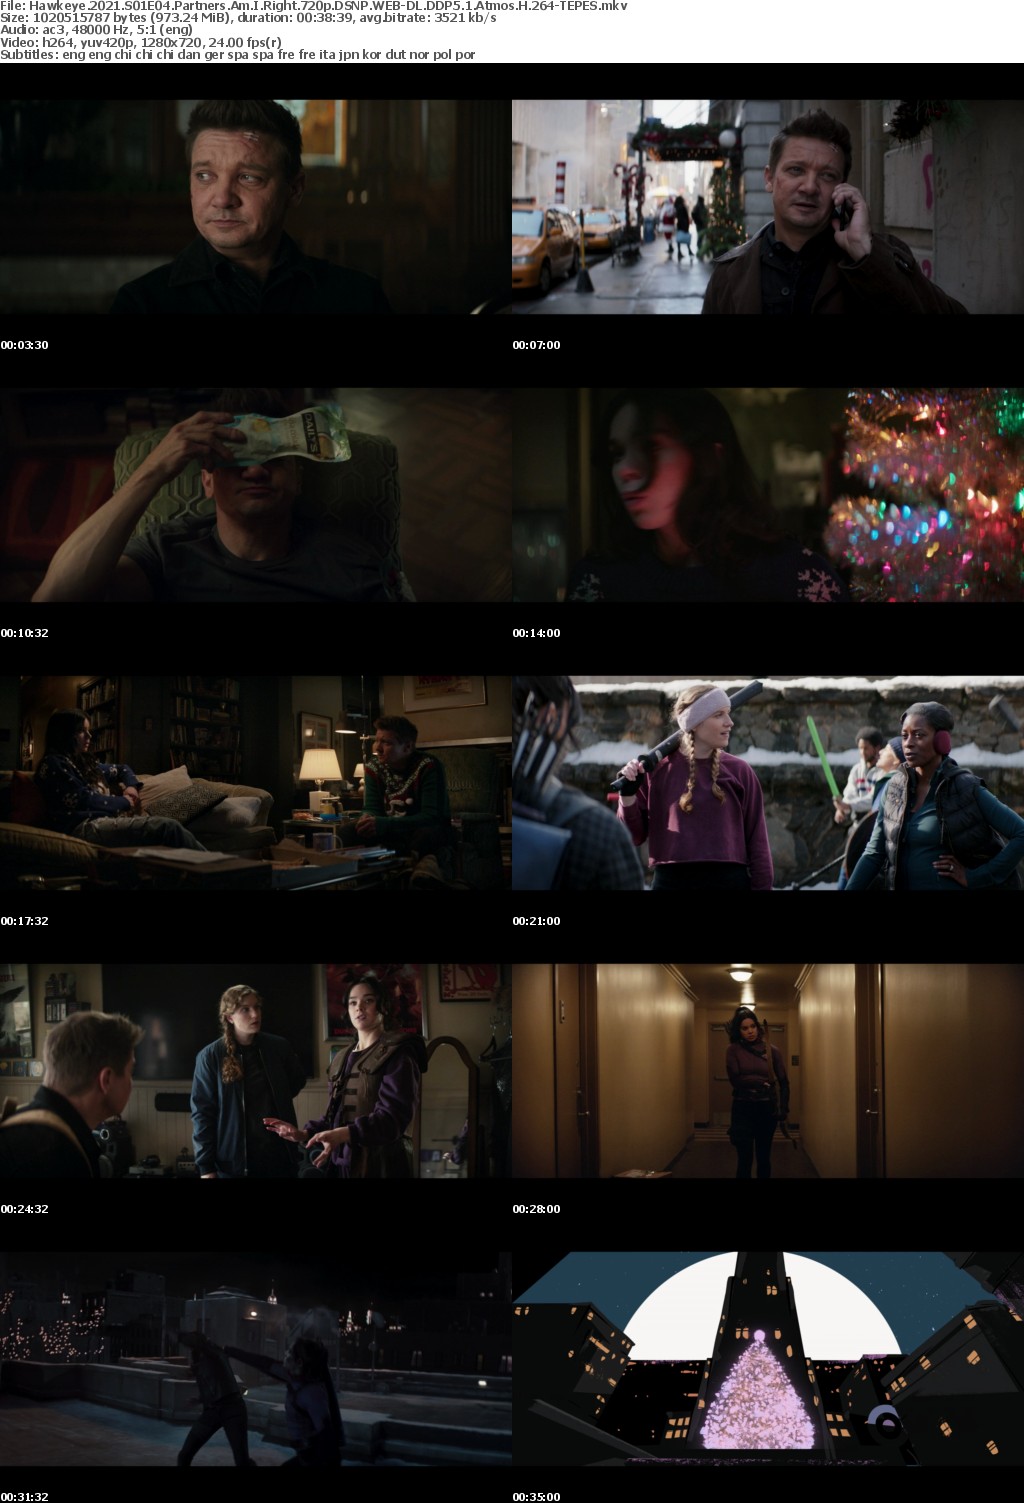 Hawkeye 2021 S01E04 Partners Am I Right 720p DSNP WEBRip DDP5 1 x264-TEPES